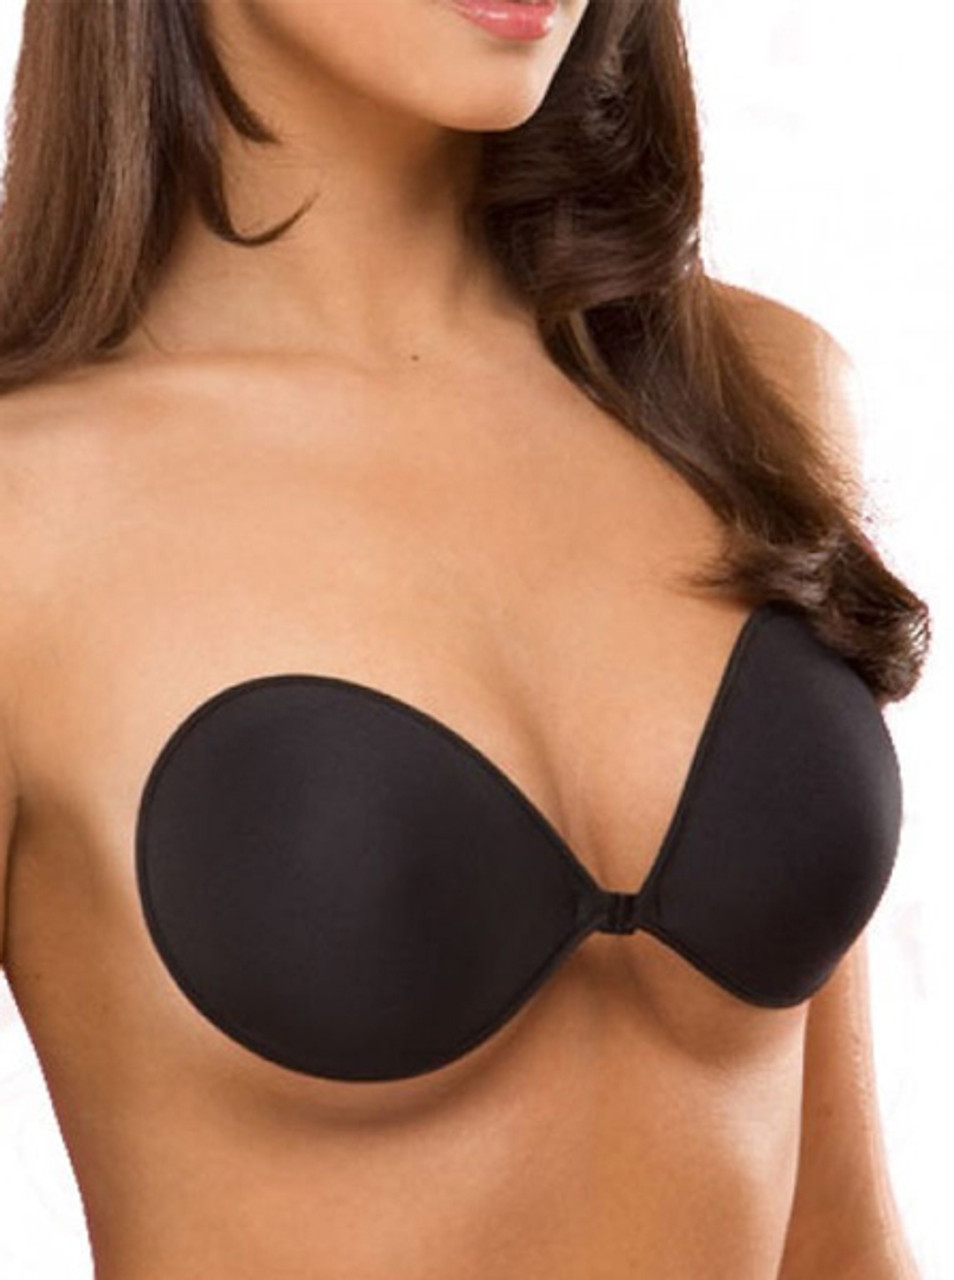 Is it okay to have your bra straps showing under clothes, like wearing  sleeveless or strapless dresses with bra straps showing? - Quora